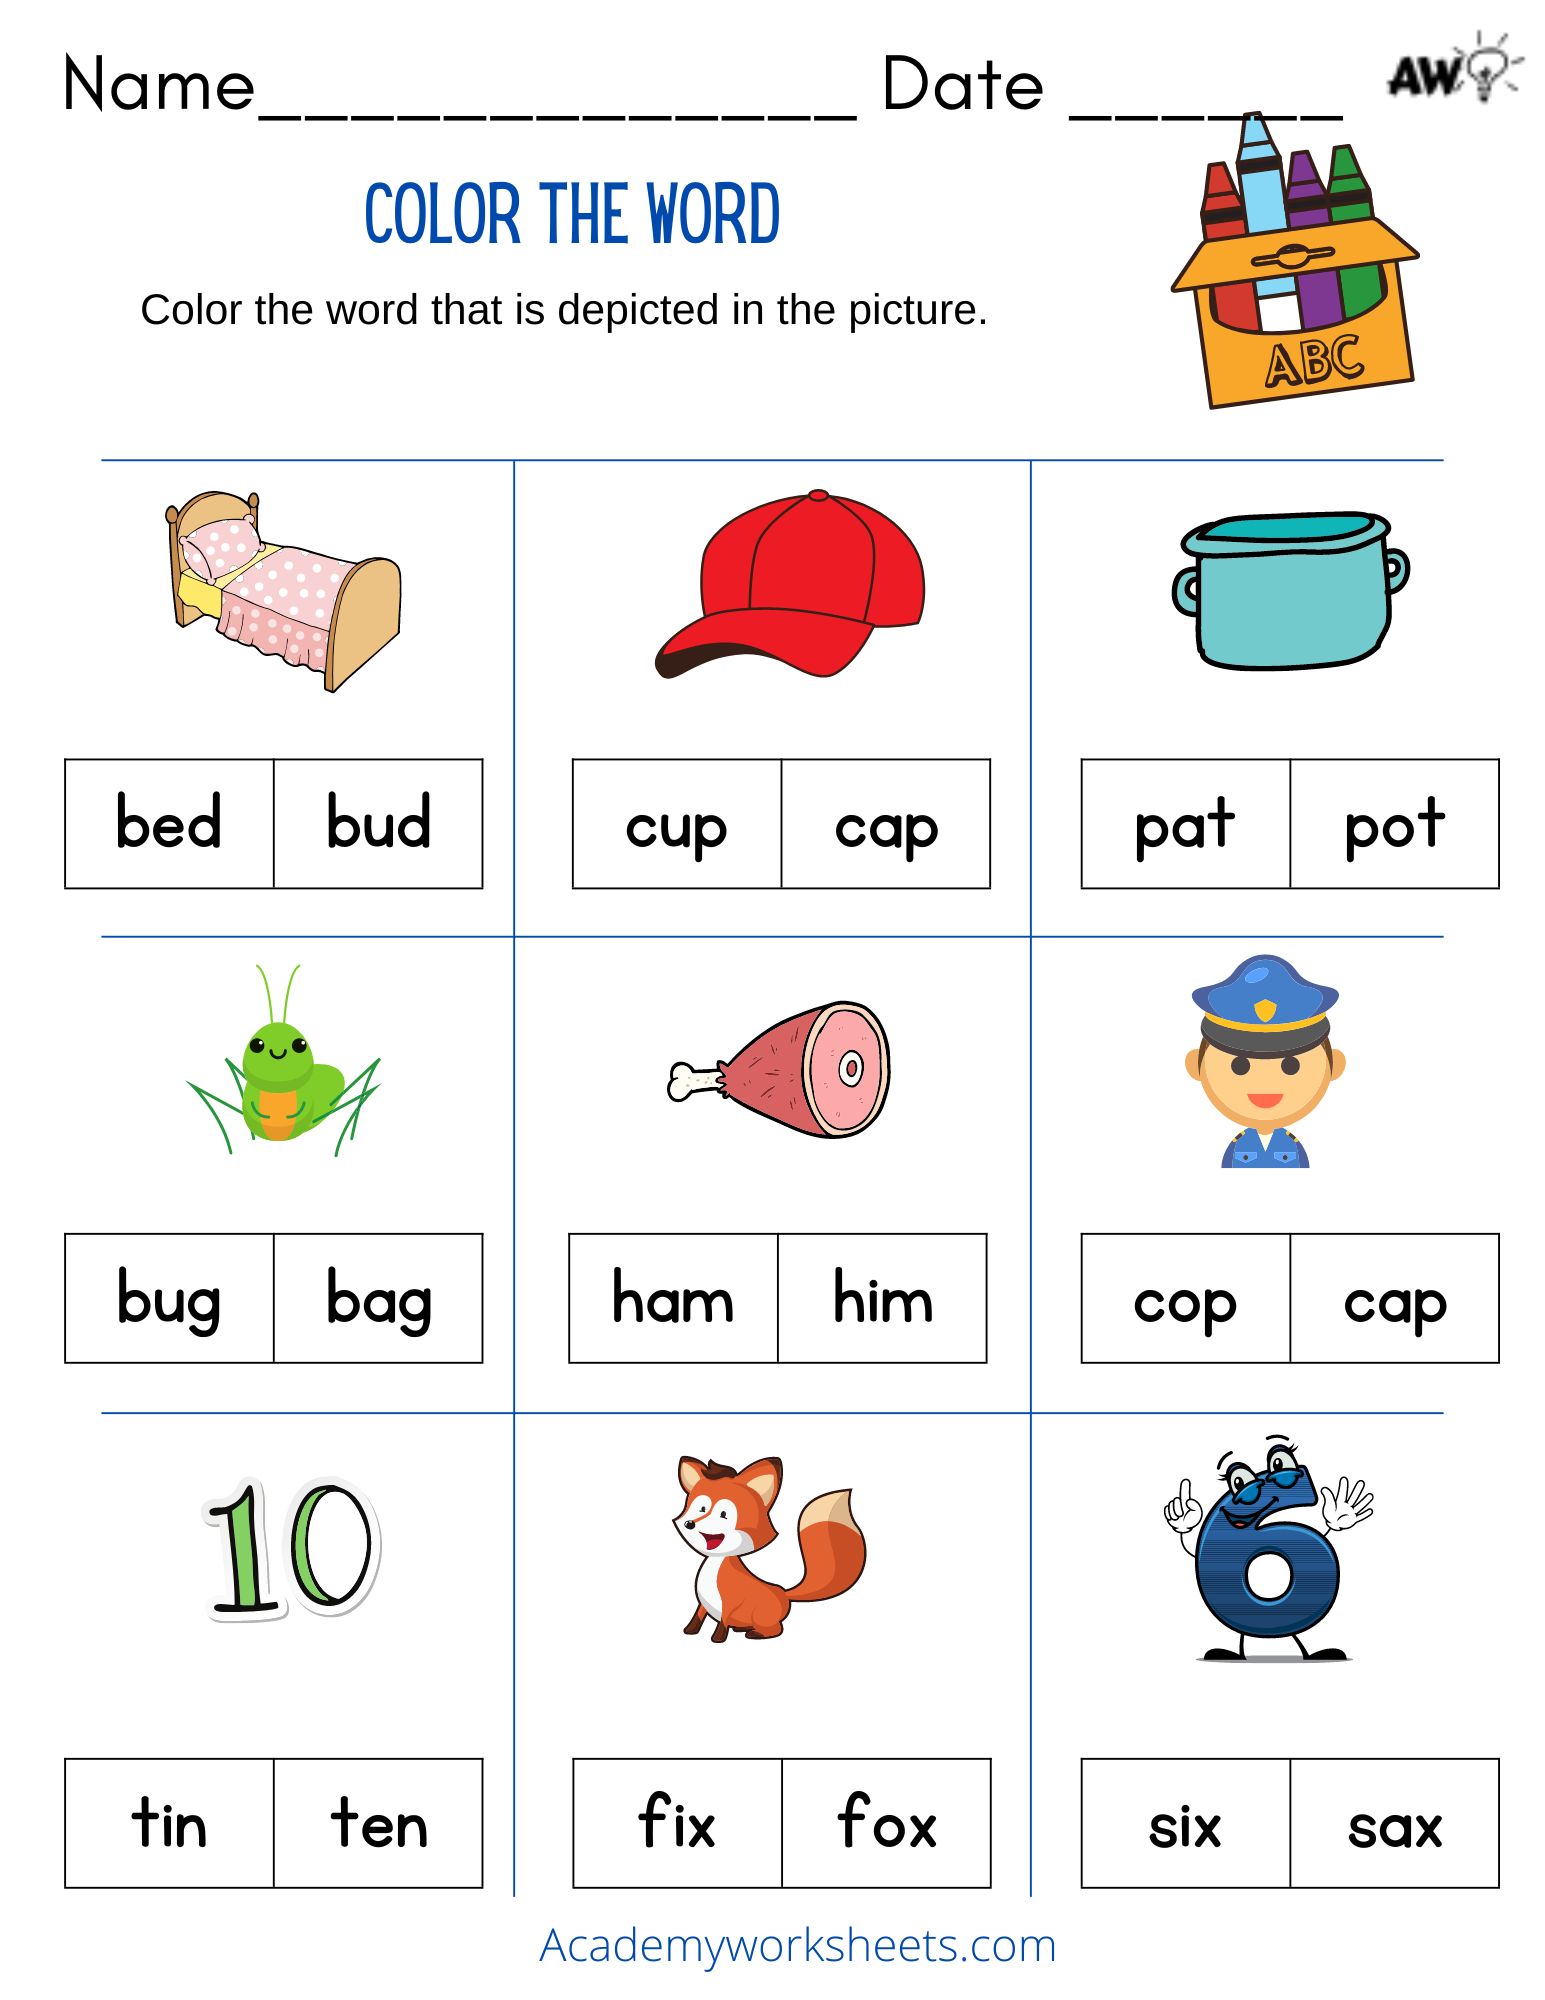 phonics-archives-academy-worksheets